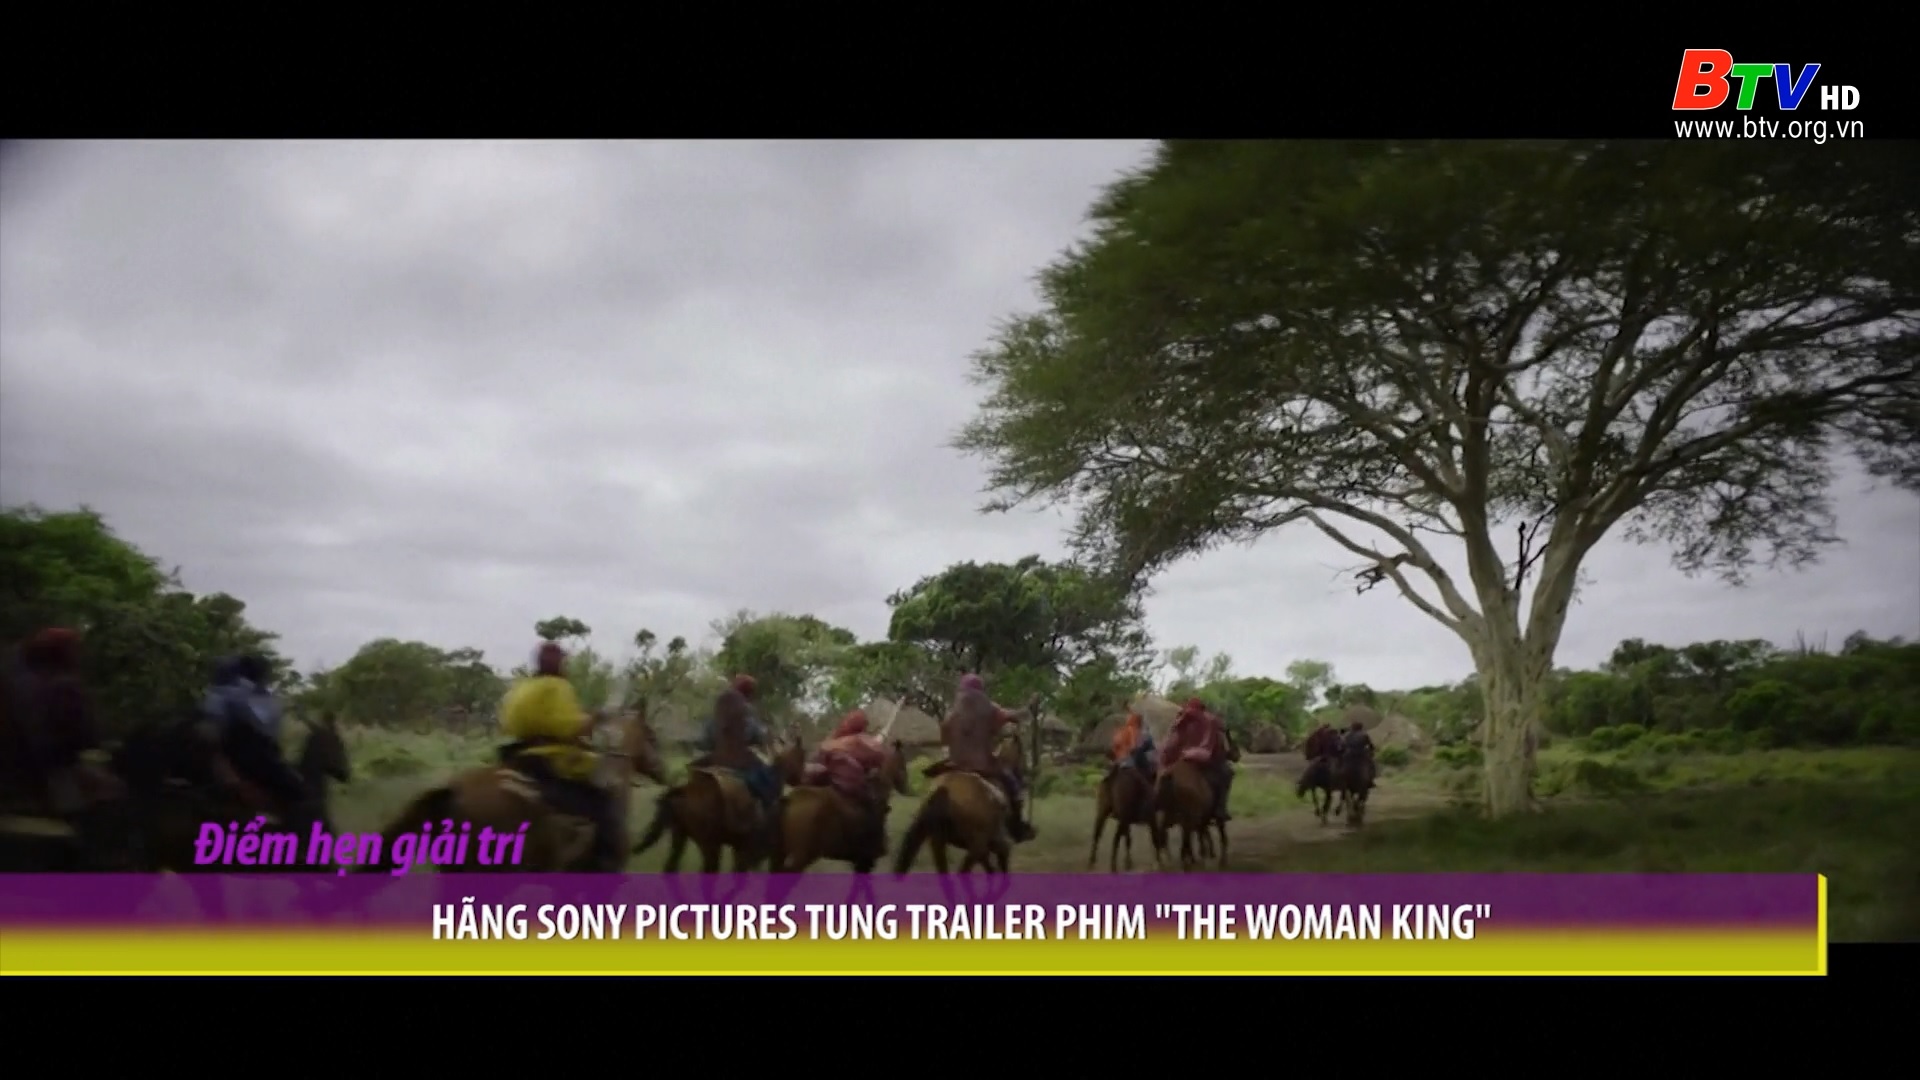 Hãng Sony Pictures tung Trailer phim “The Woman King”